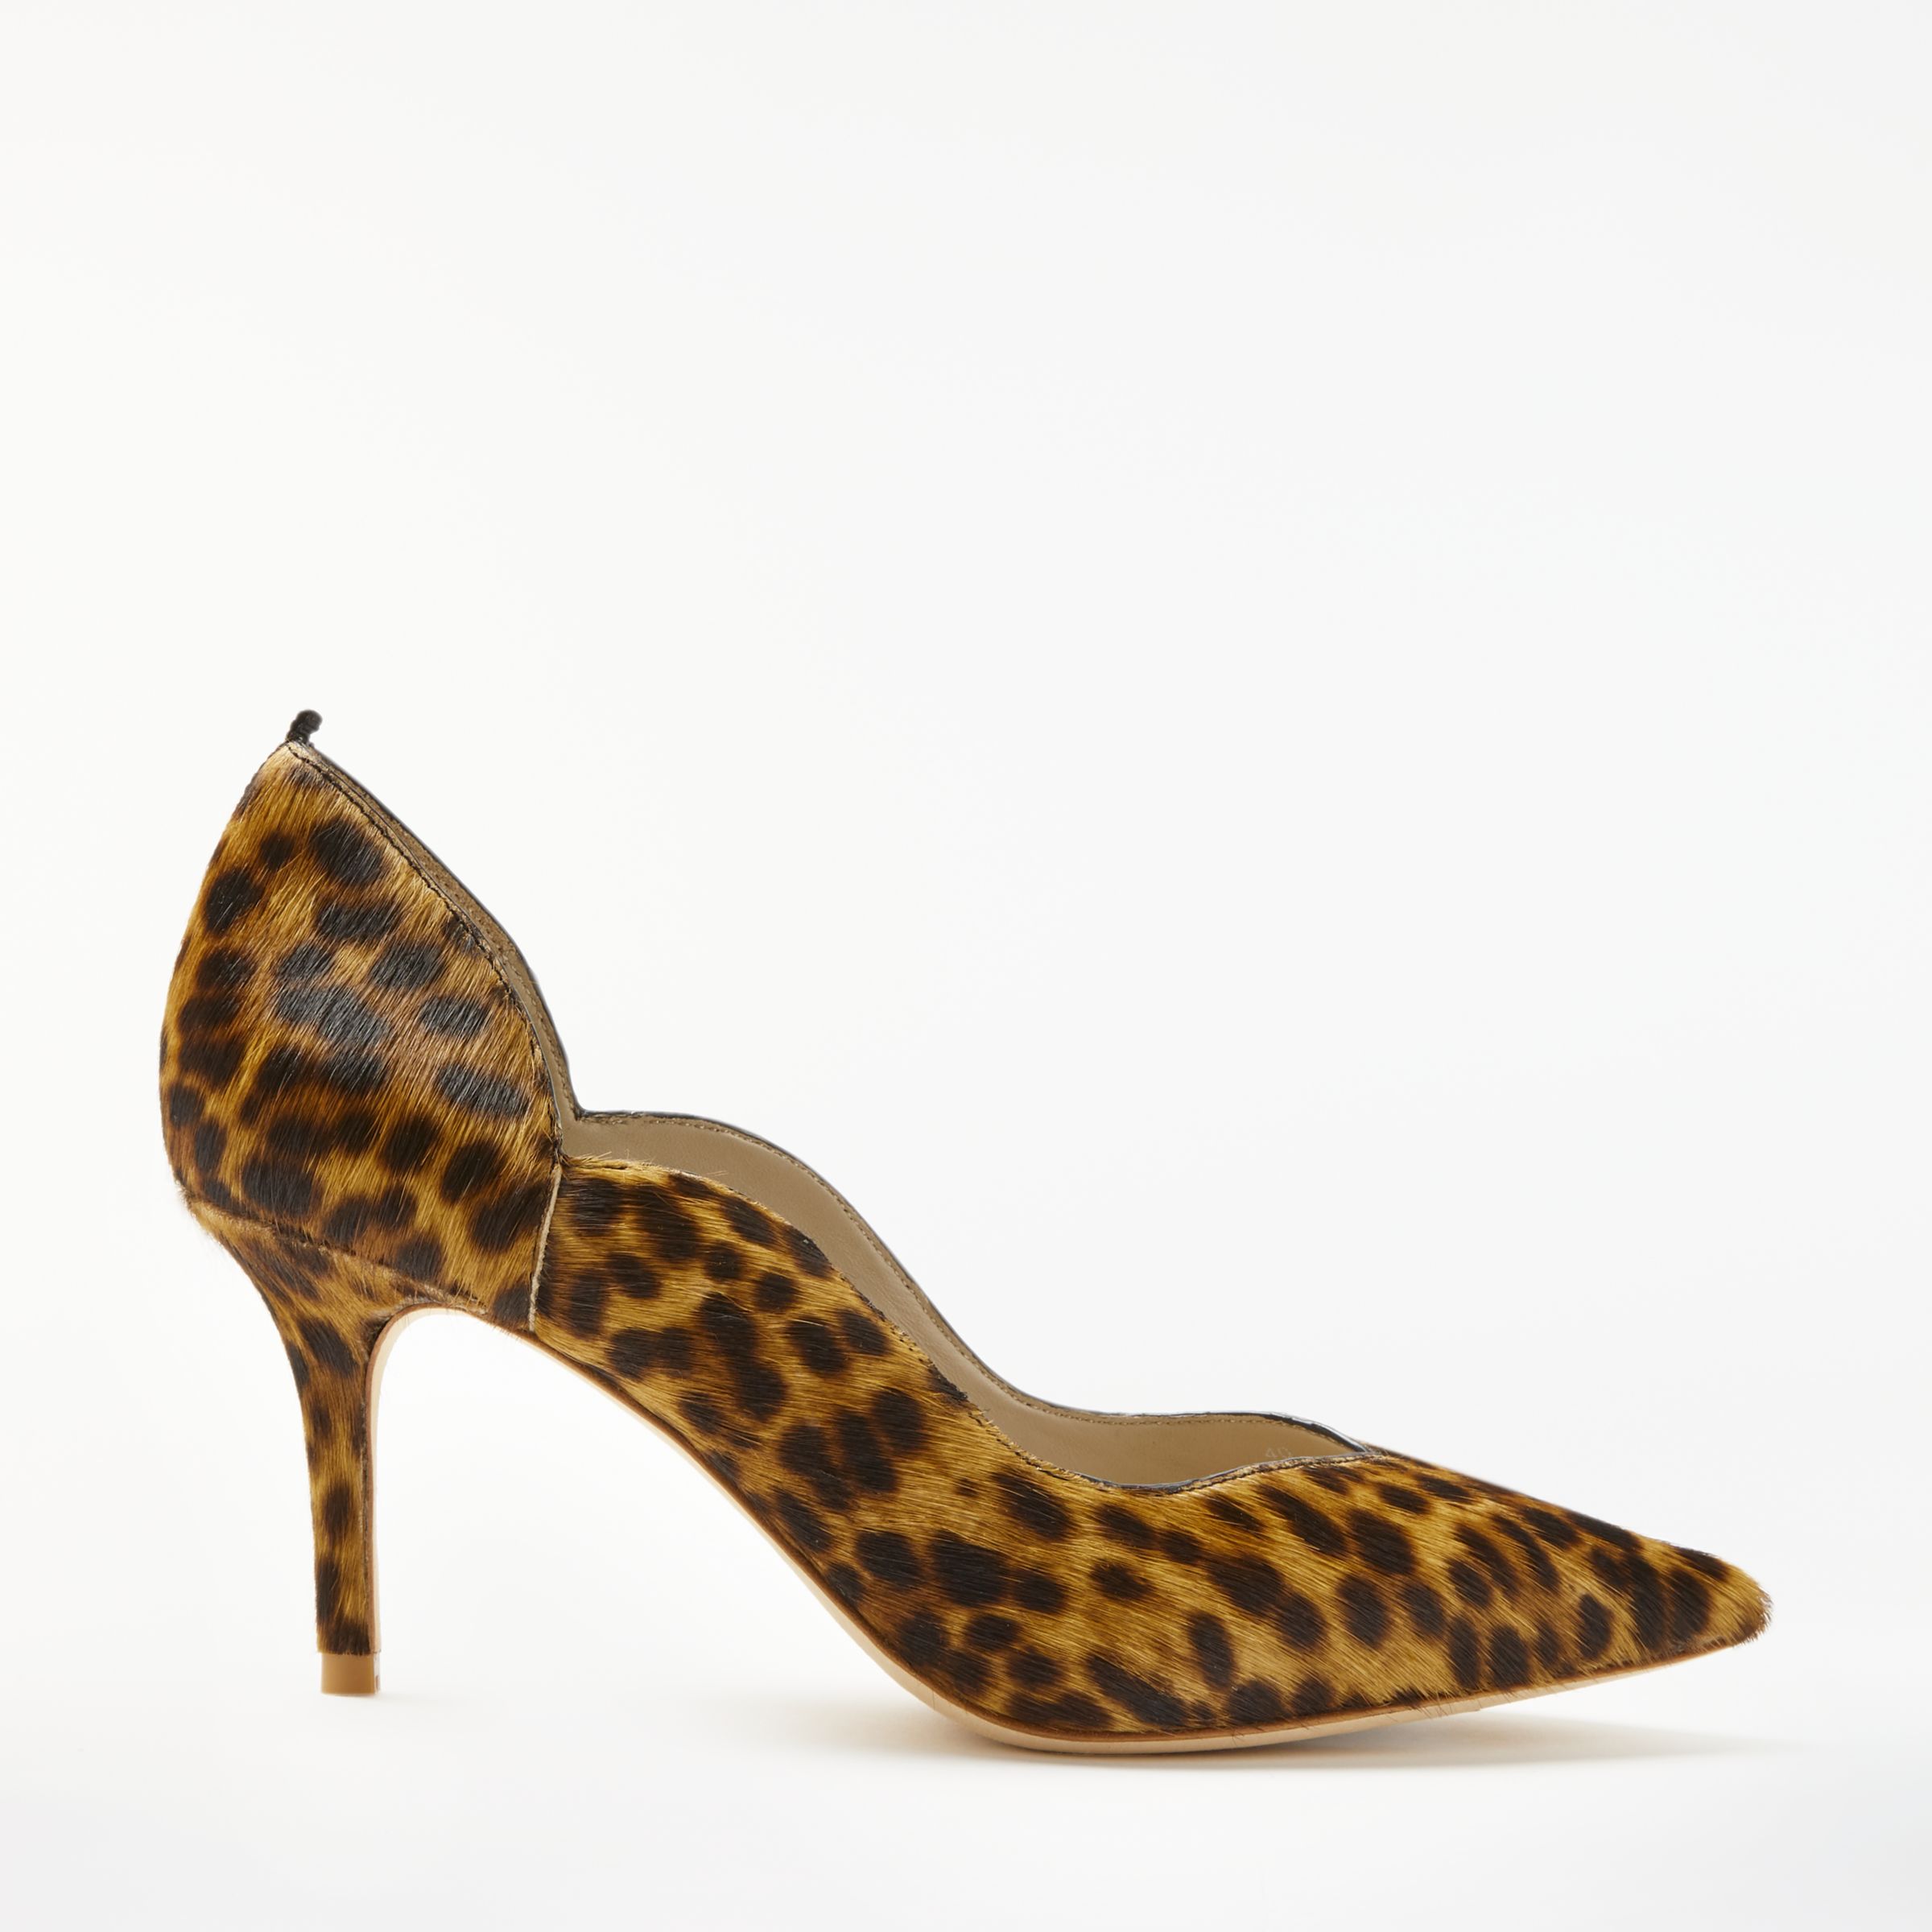 Boden Madison Stiletto Heeled Court Shoes, Leopard Leather